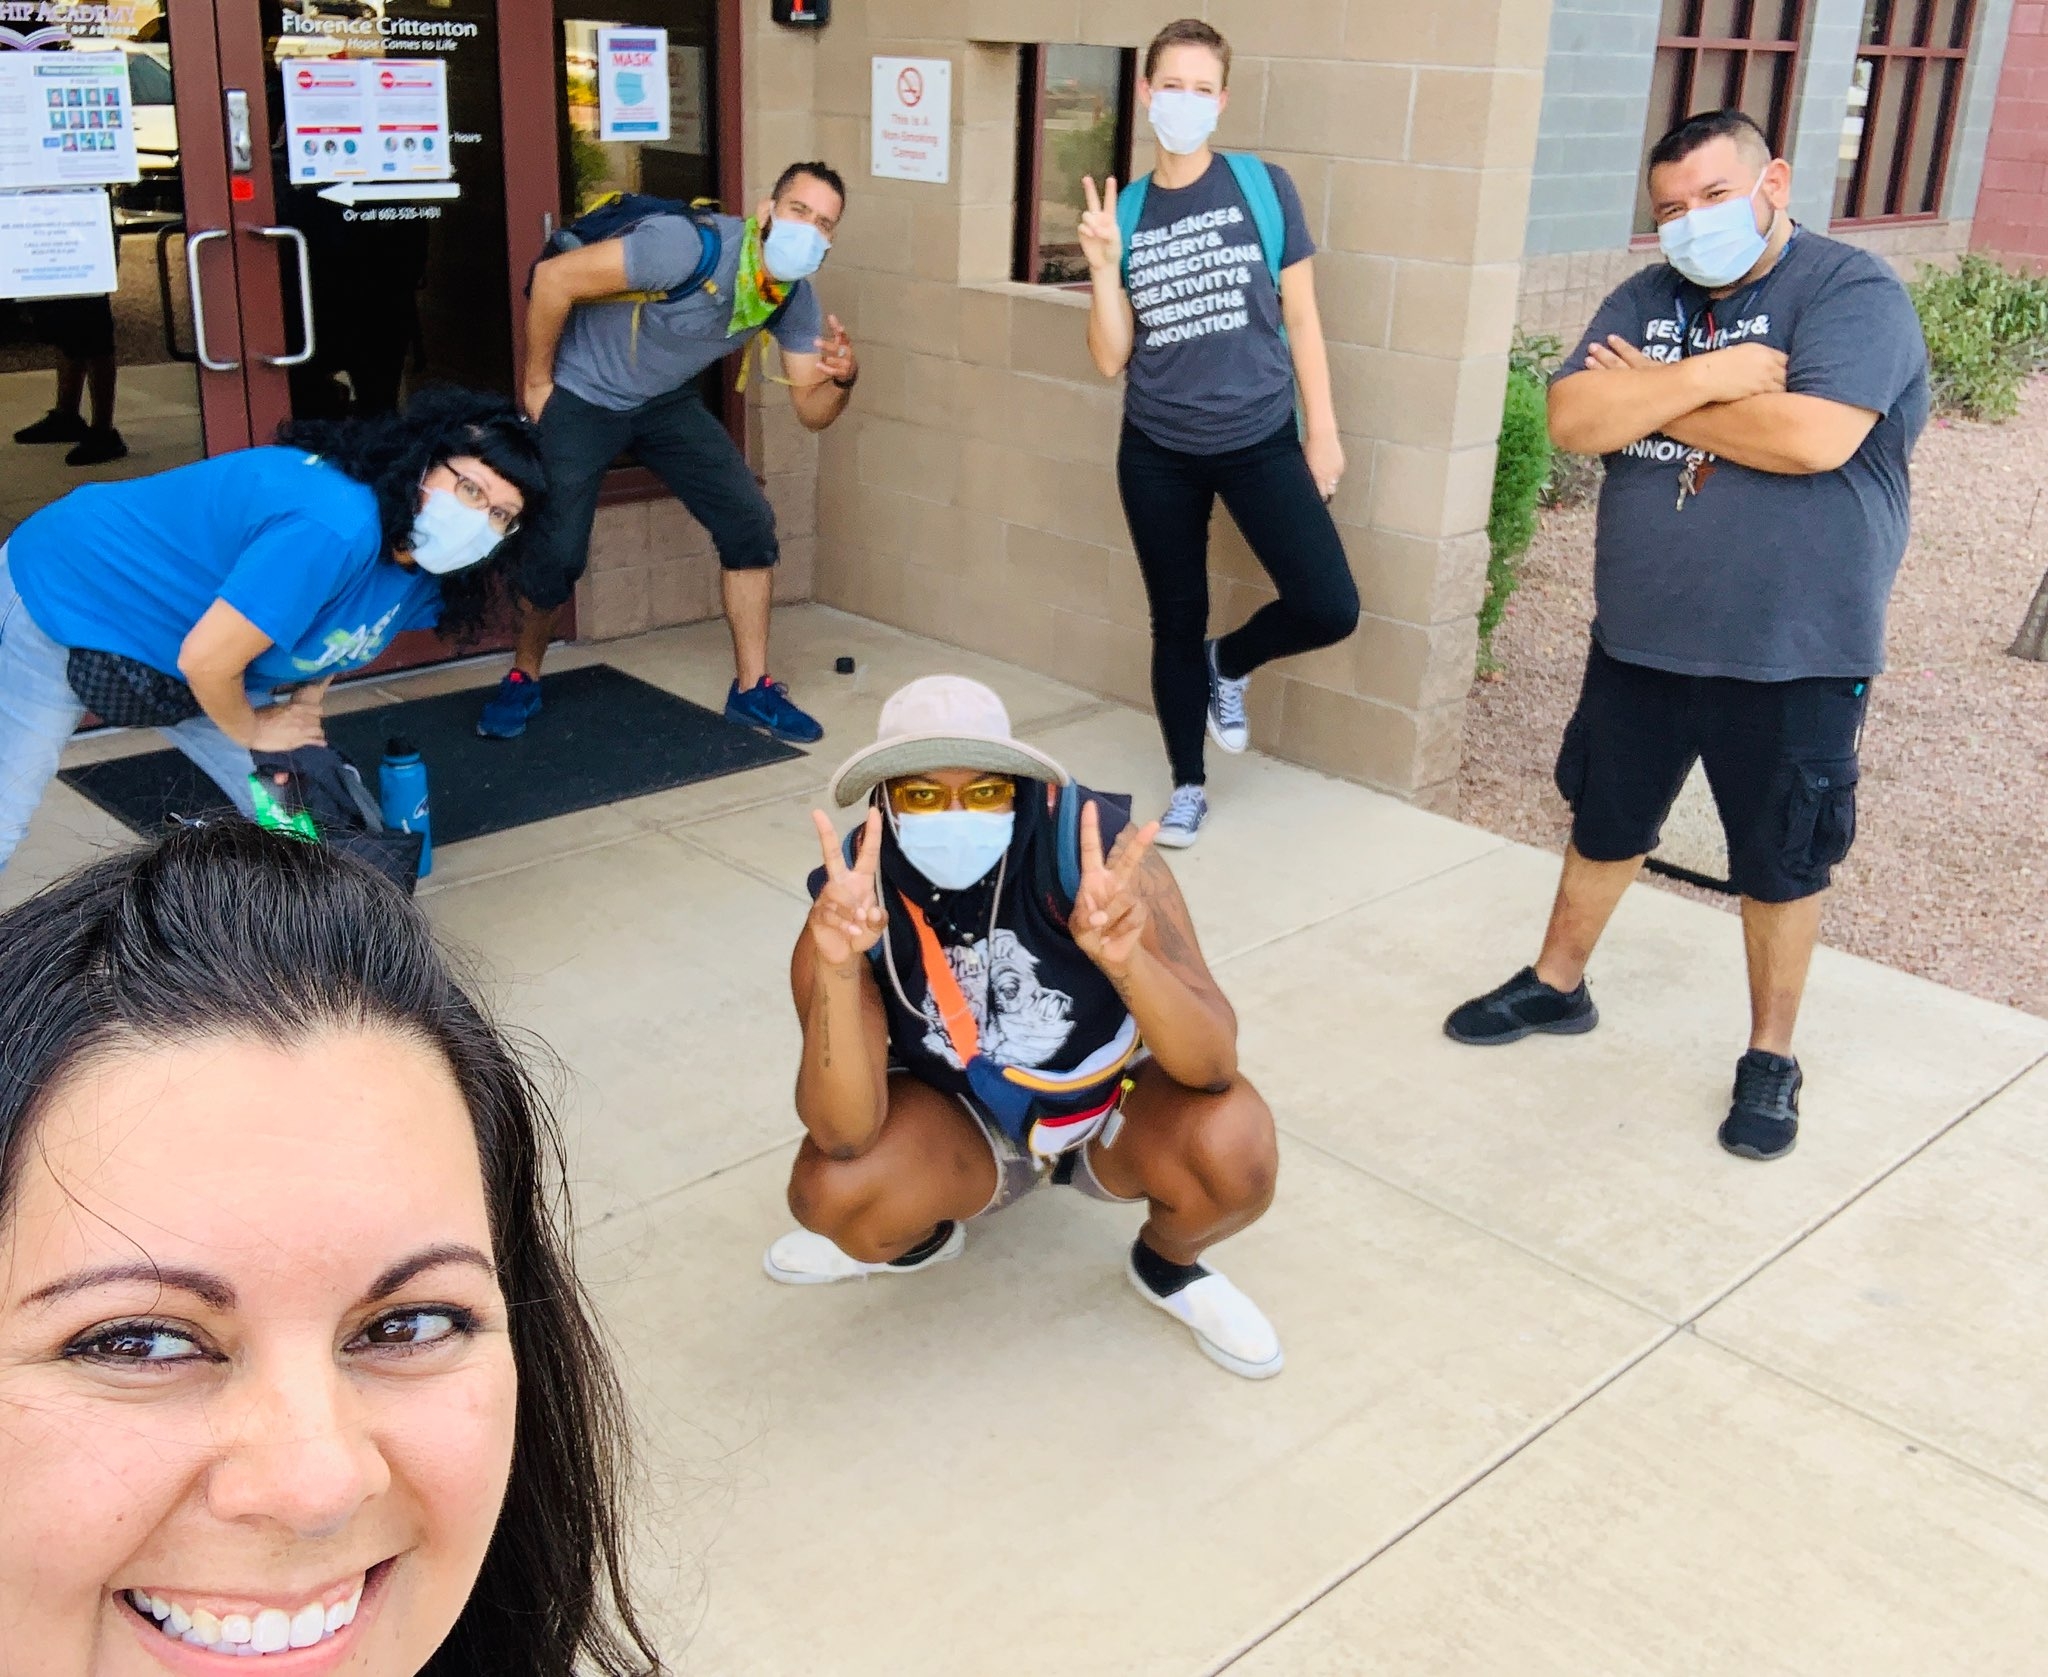 Members of Free Arts for Abused Kids of Arizona in front of a building. All are wearing face masks.